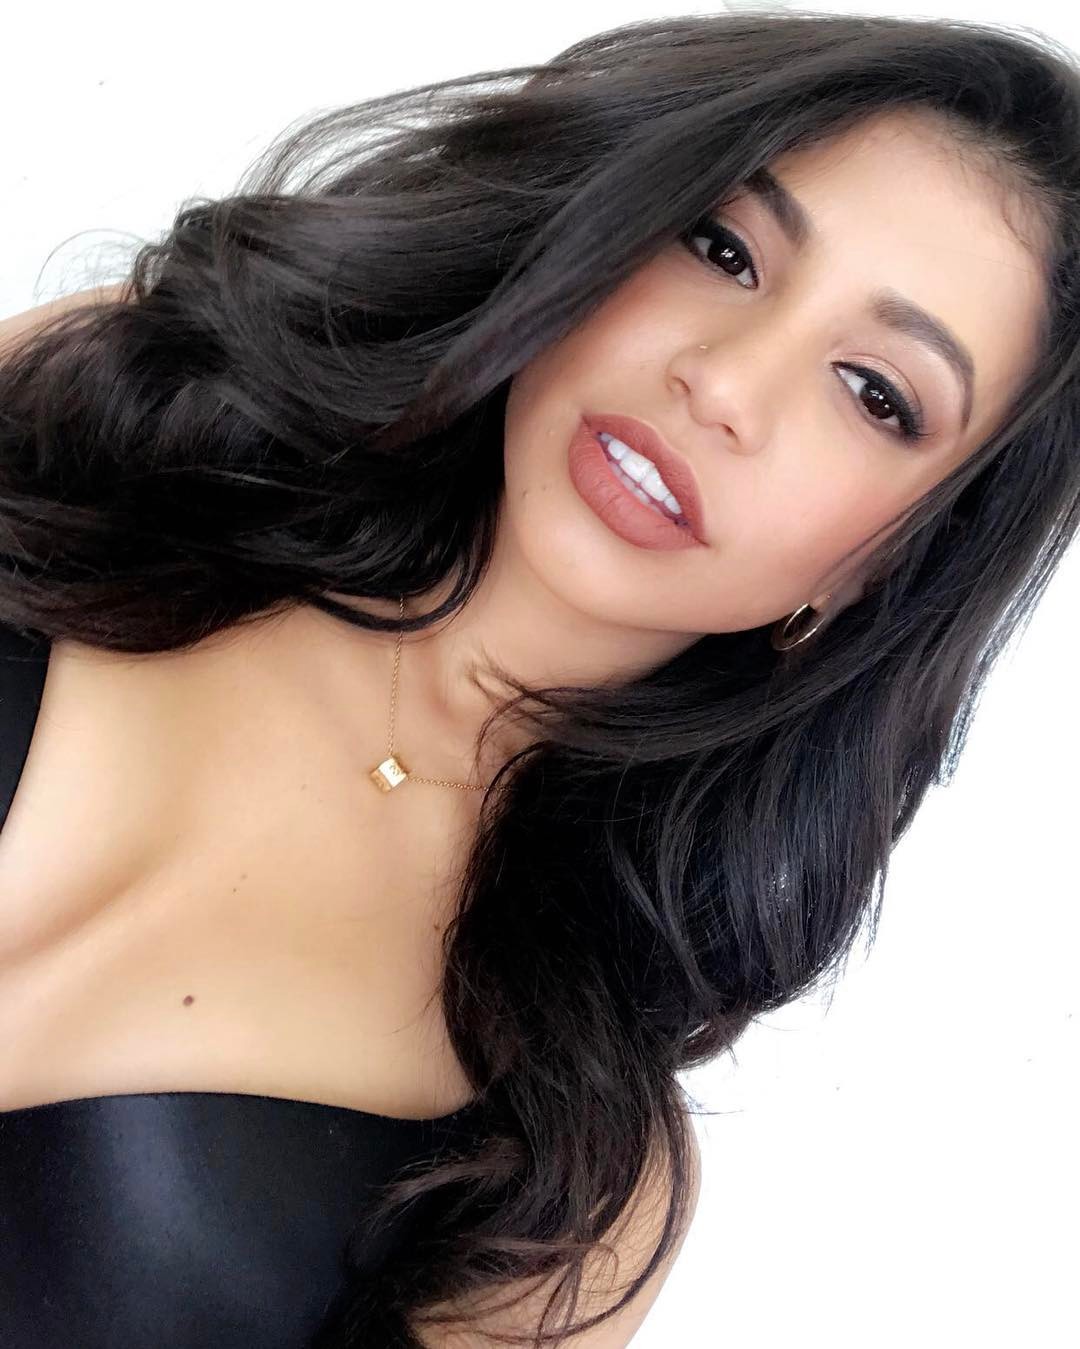 Veronica Rodriguez is a model that appeared in Tory Lanez BID